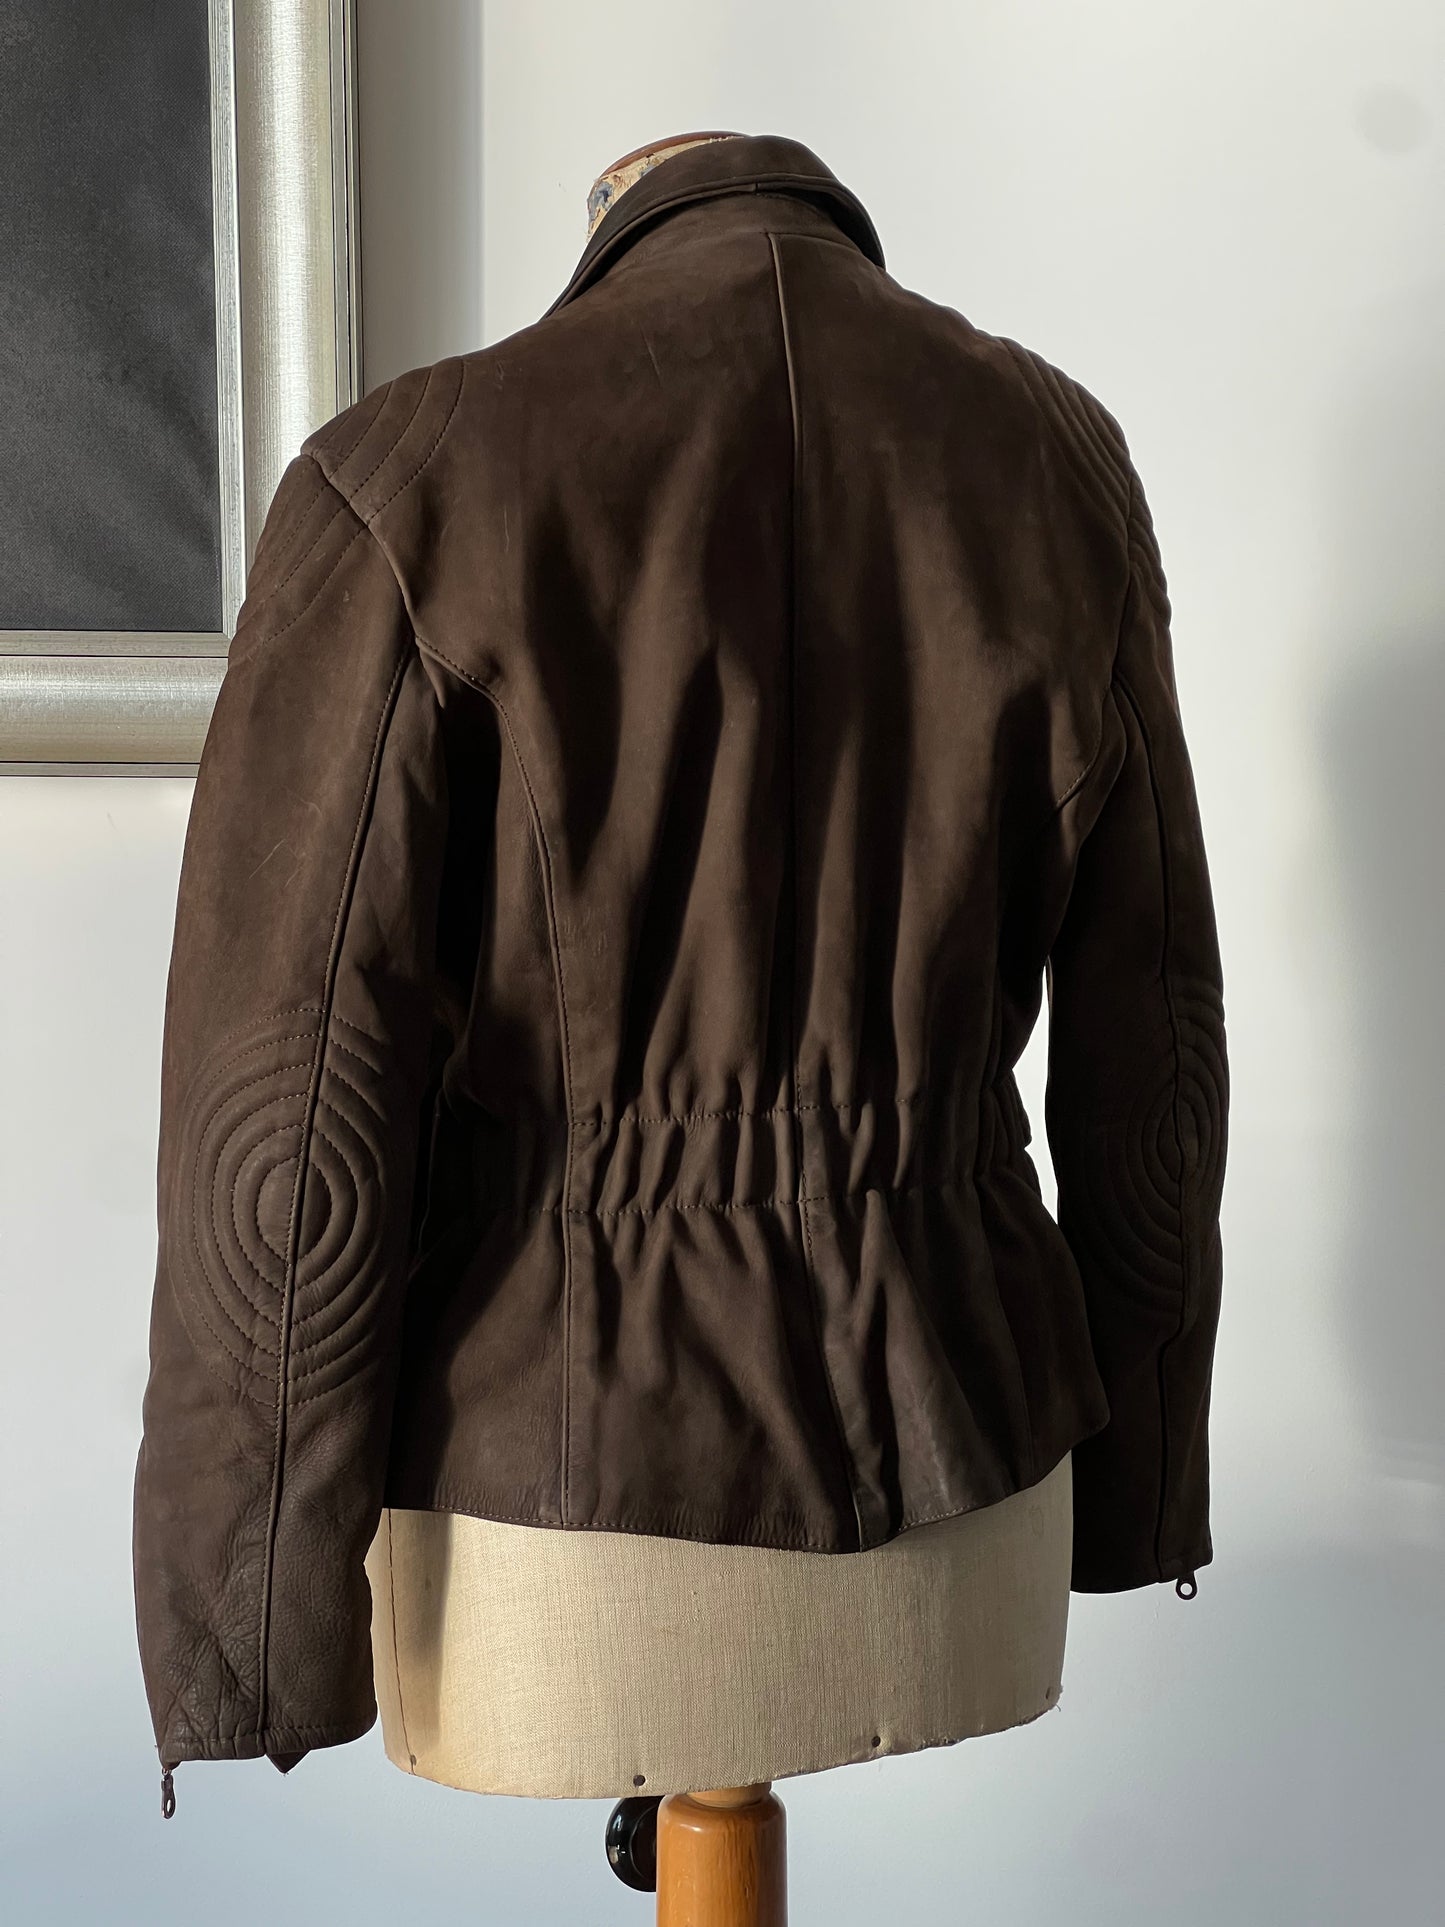 brown suede leather women’s jacket back